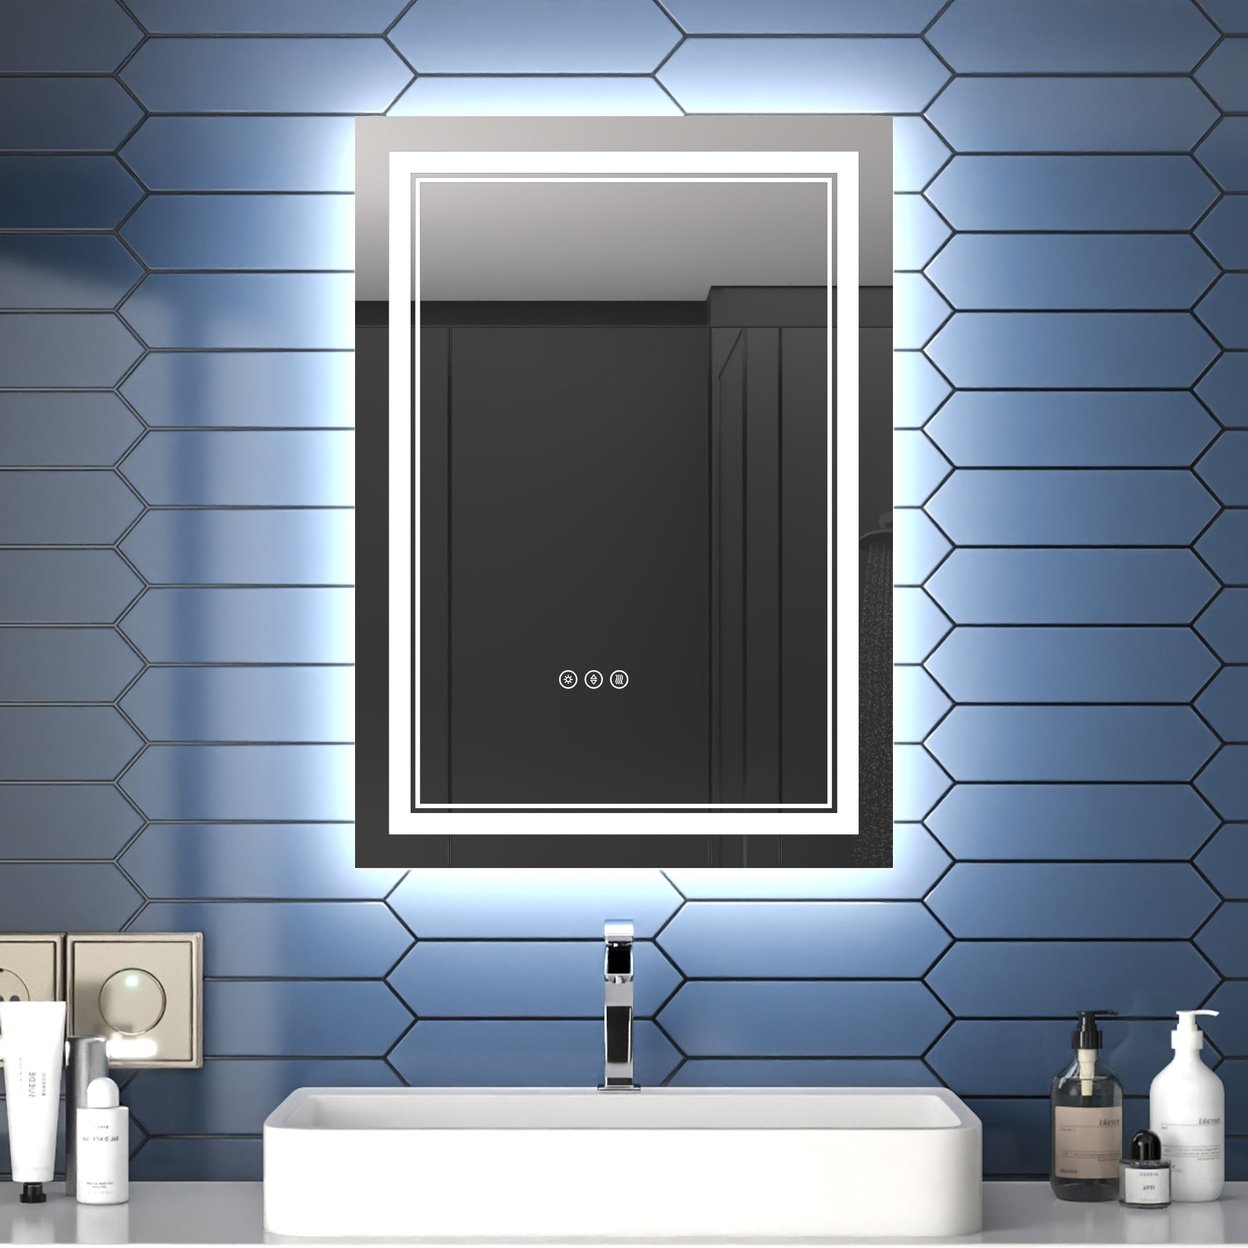 Allsumhome Linea 20&#x22; W x 28&#x22; H LED Heated Bathroom MirrorAnti FogDimmableFront-Lighted and Backlit Tempered Glass